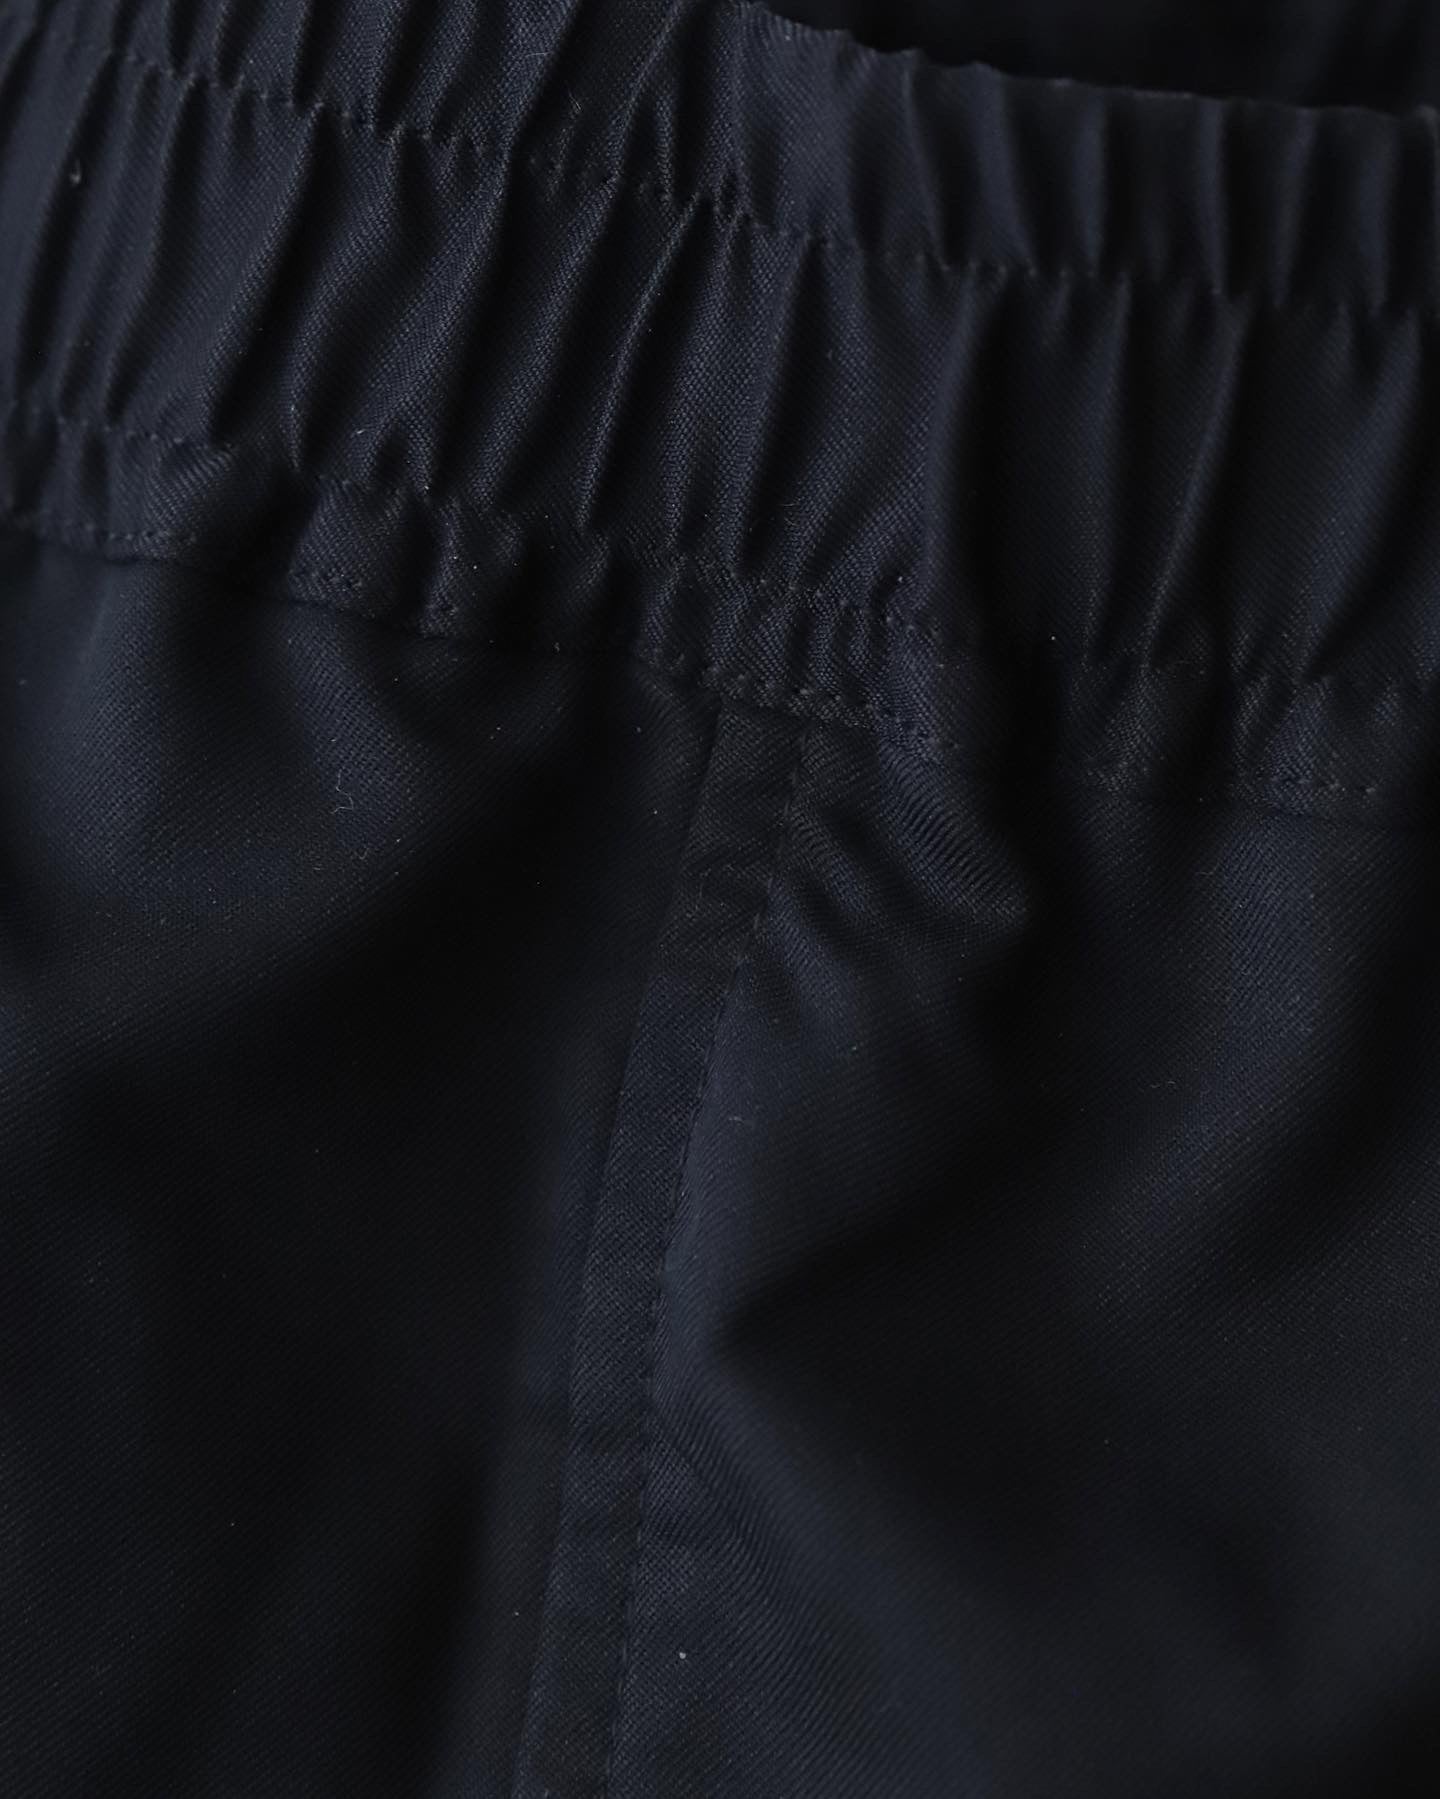 COOLFIBER TWO TUCK EASY SHORTS